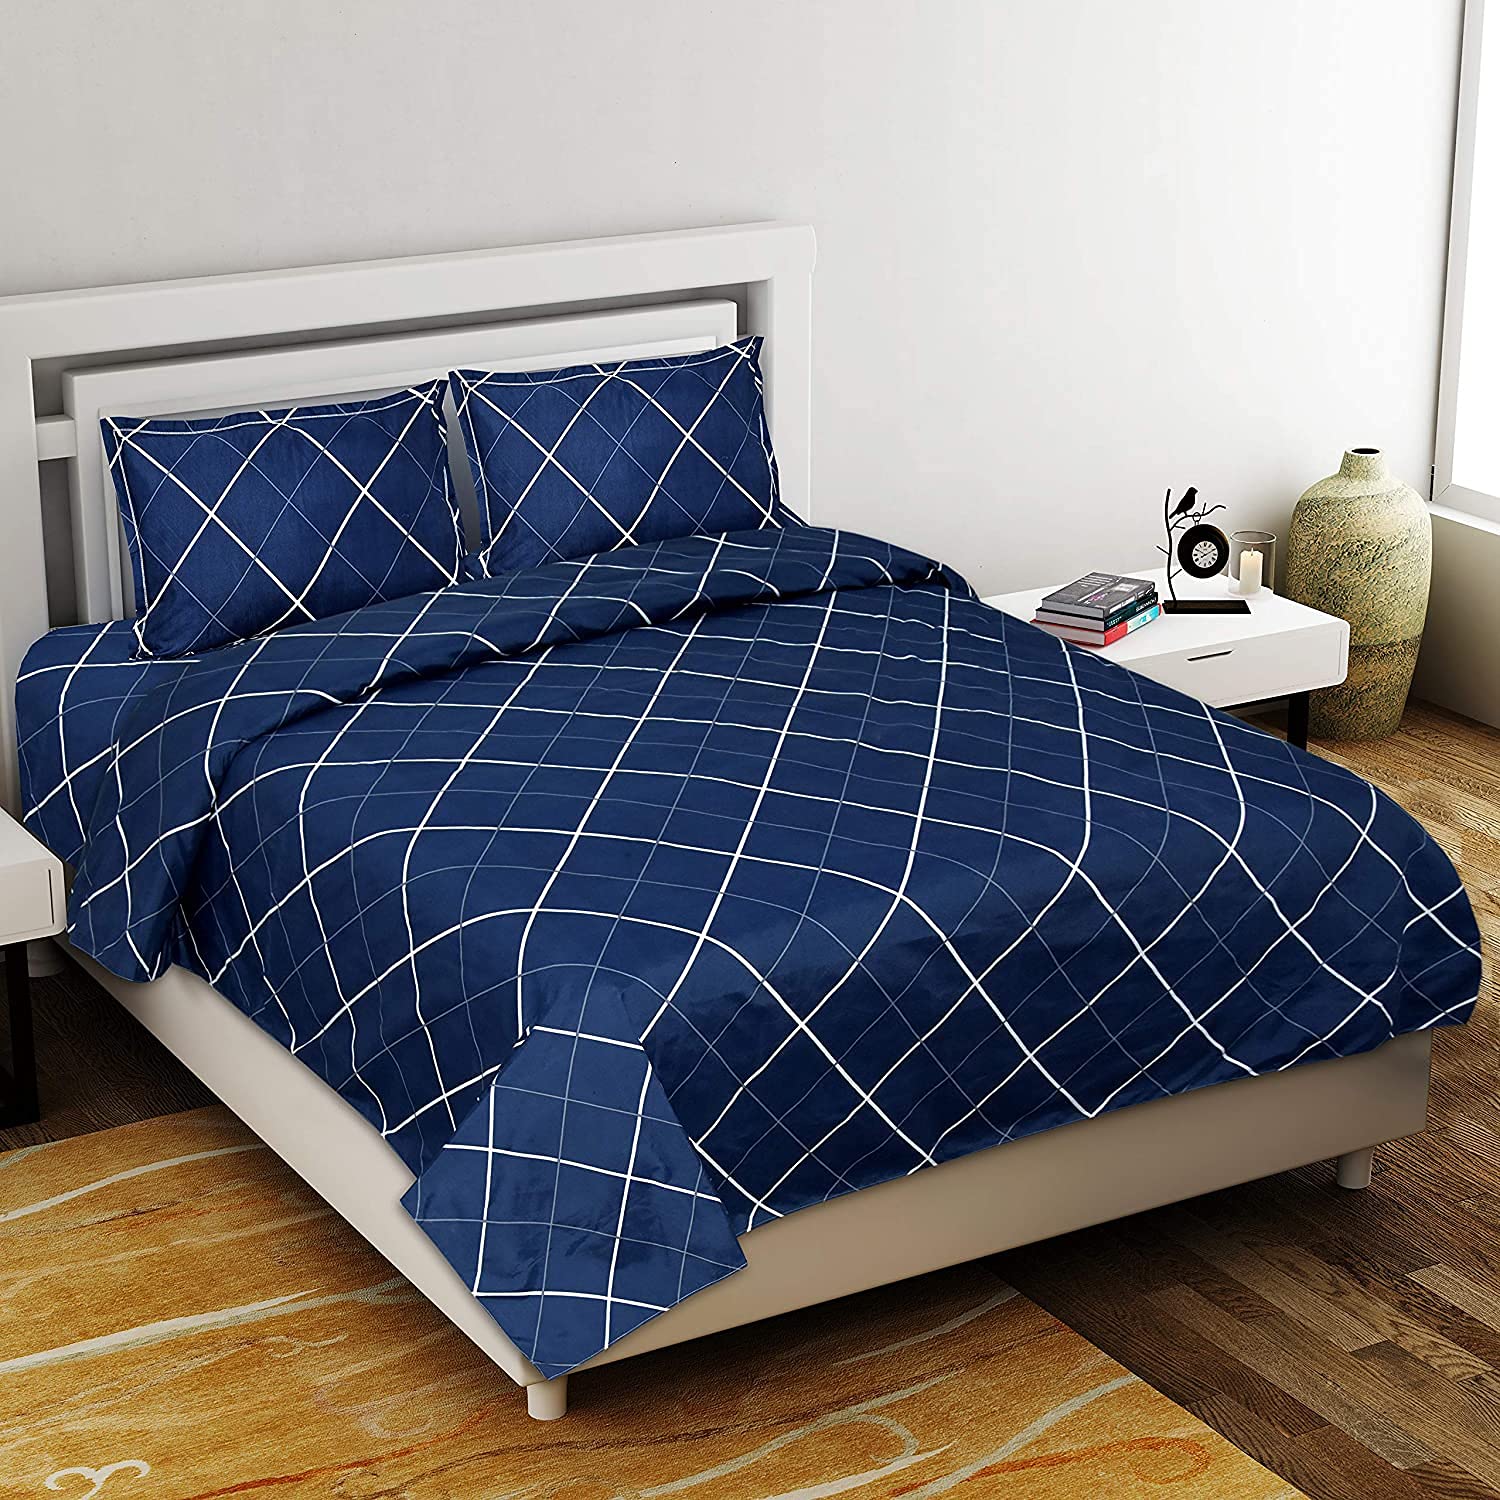 Kuber Industries 144 TC Glace Cotton Geometric Design Double Bedsheet with 2 Pillow Covers (Blue, Full King Size, Hs_37_Kubmart020129)